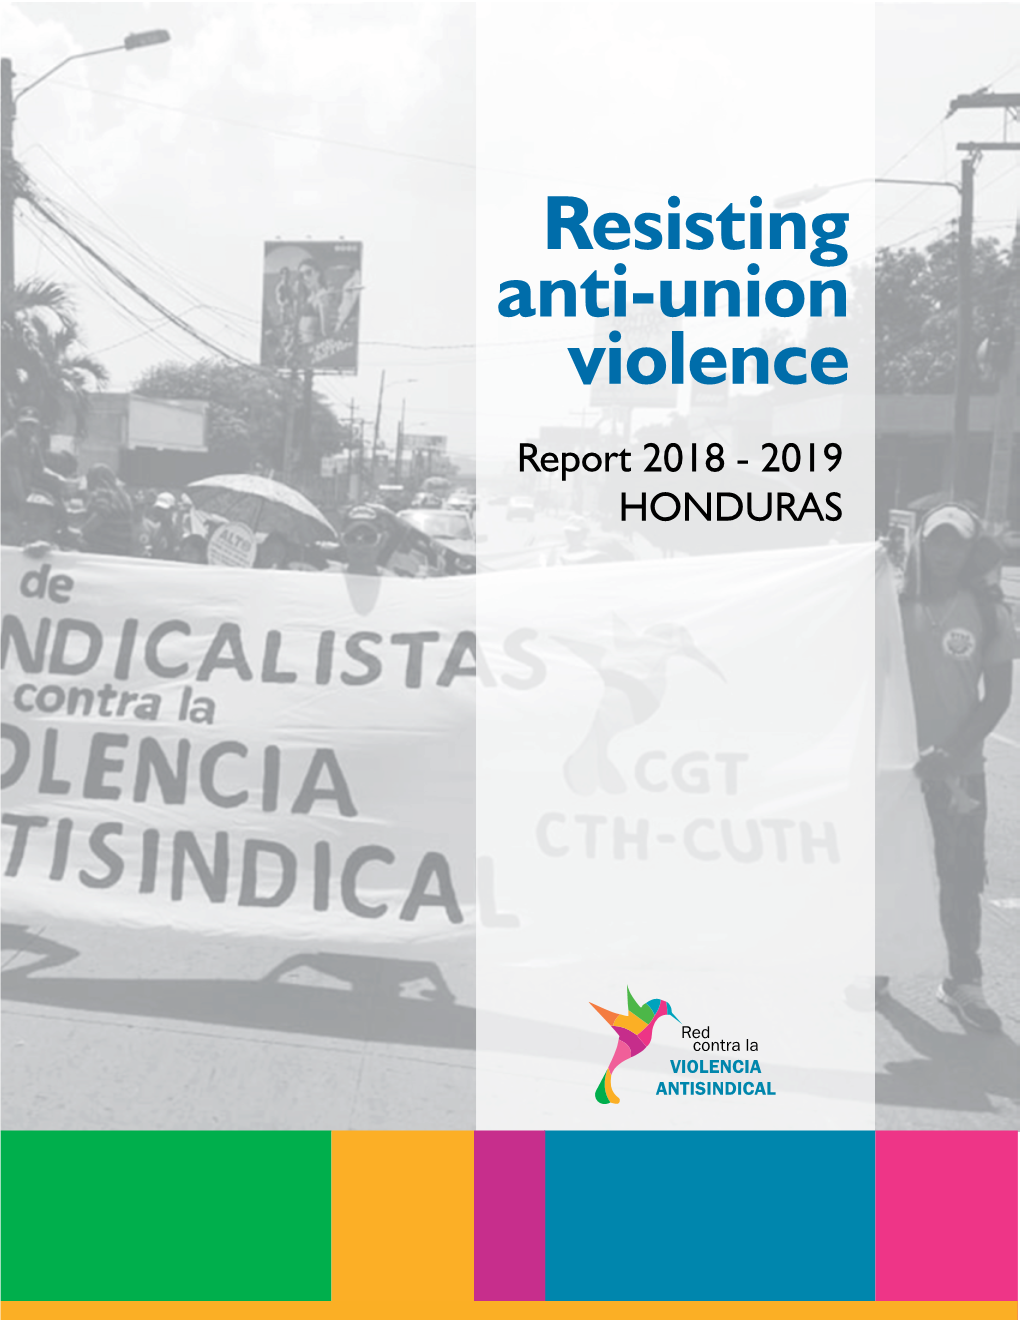 Resisting Anti-Union Violence Report 2018 - 2019 for the Truth HONDURAS and Justice!